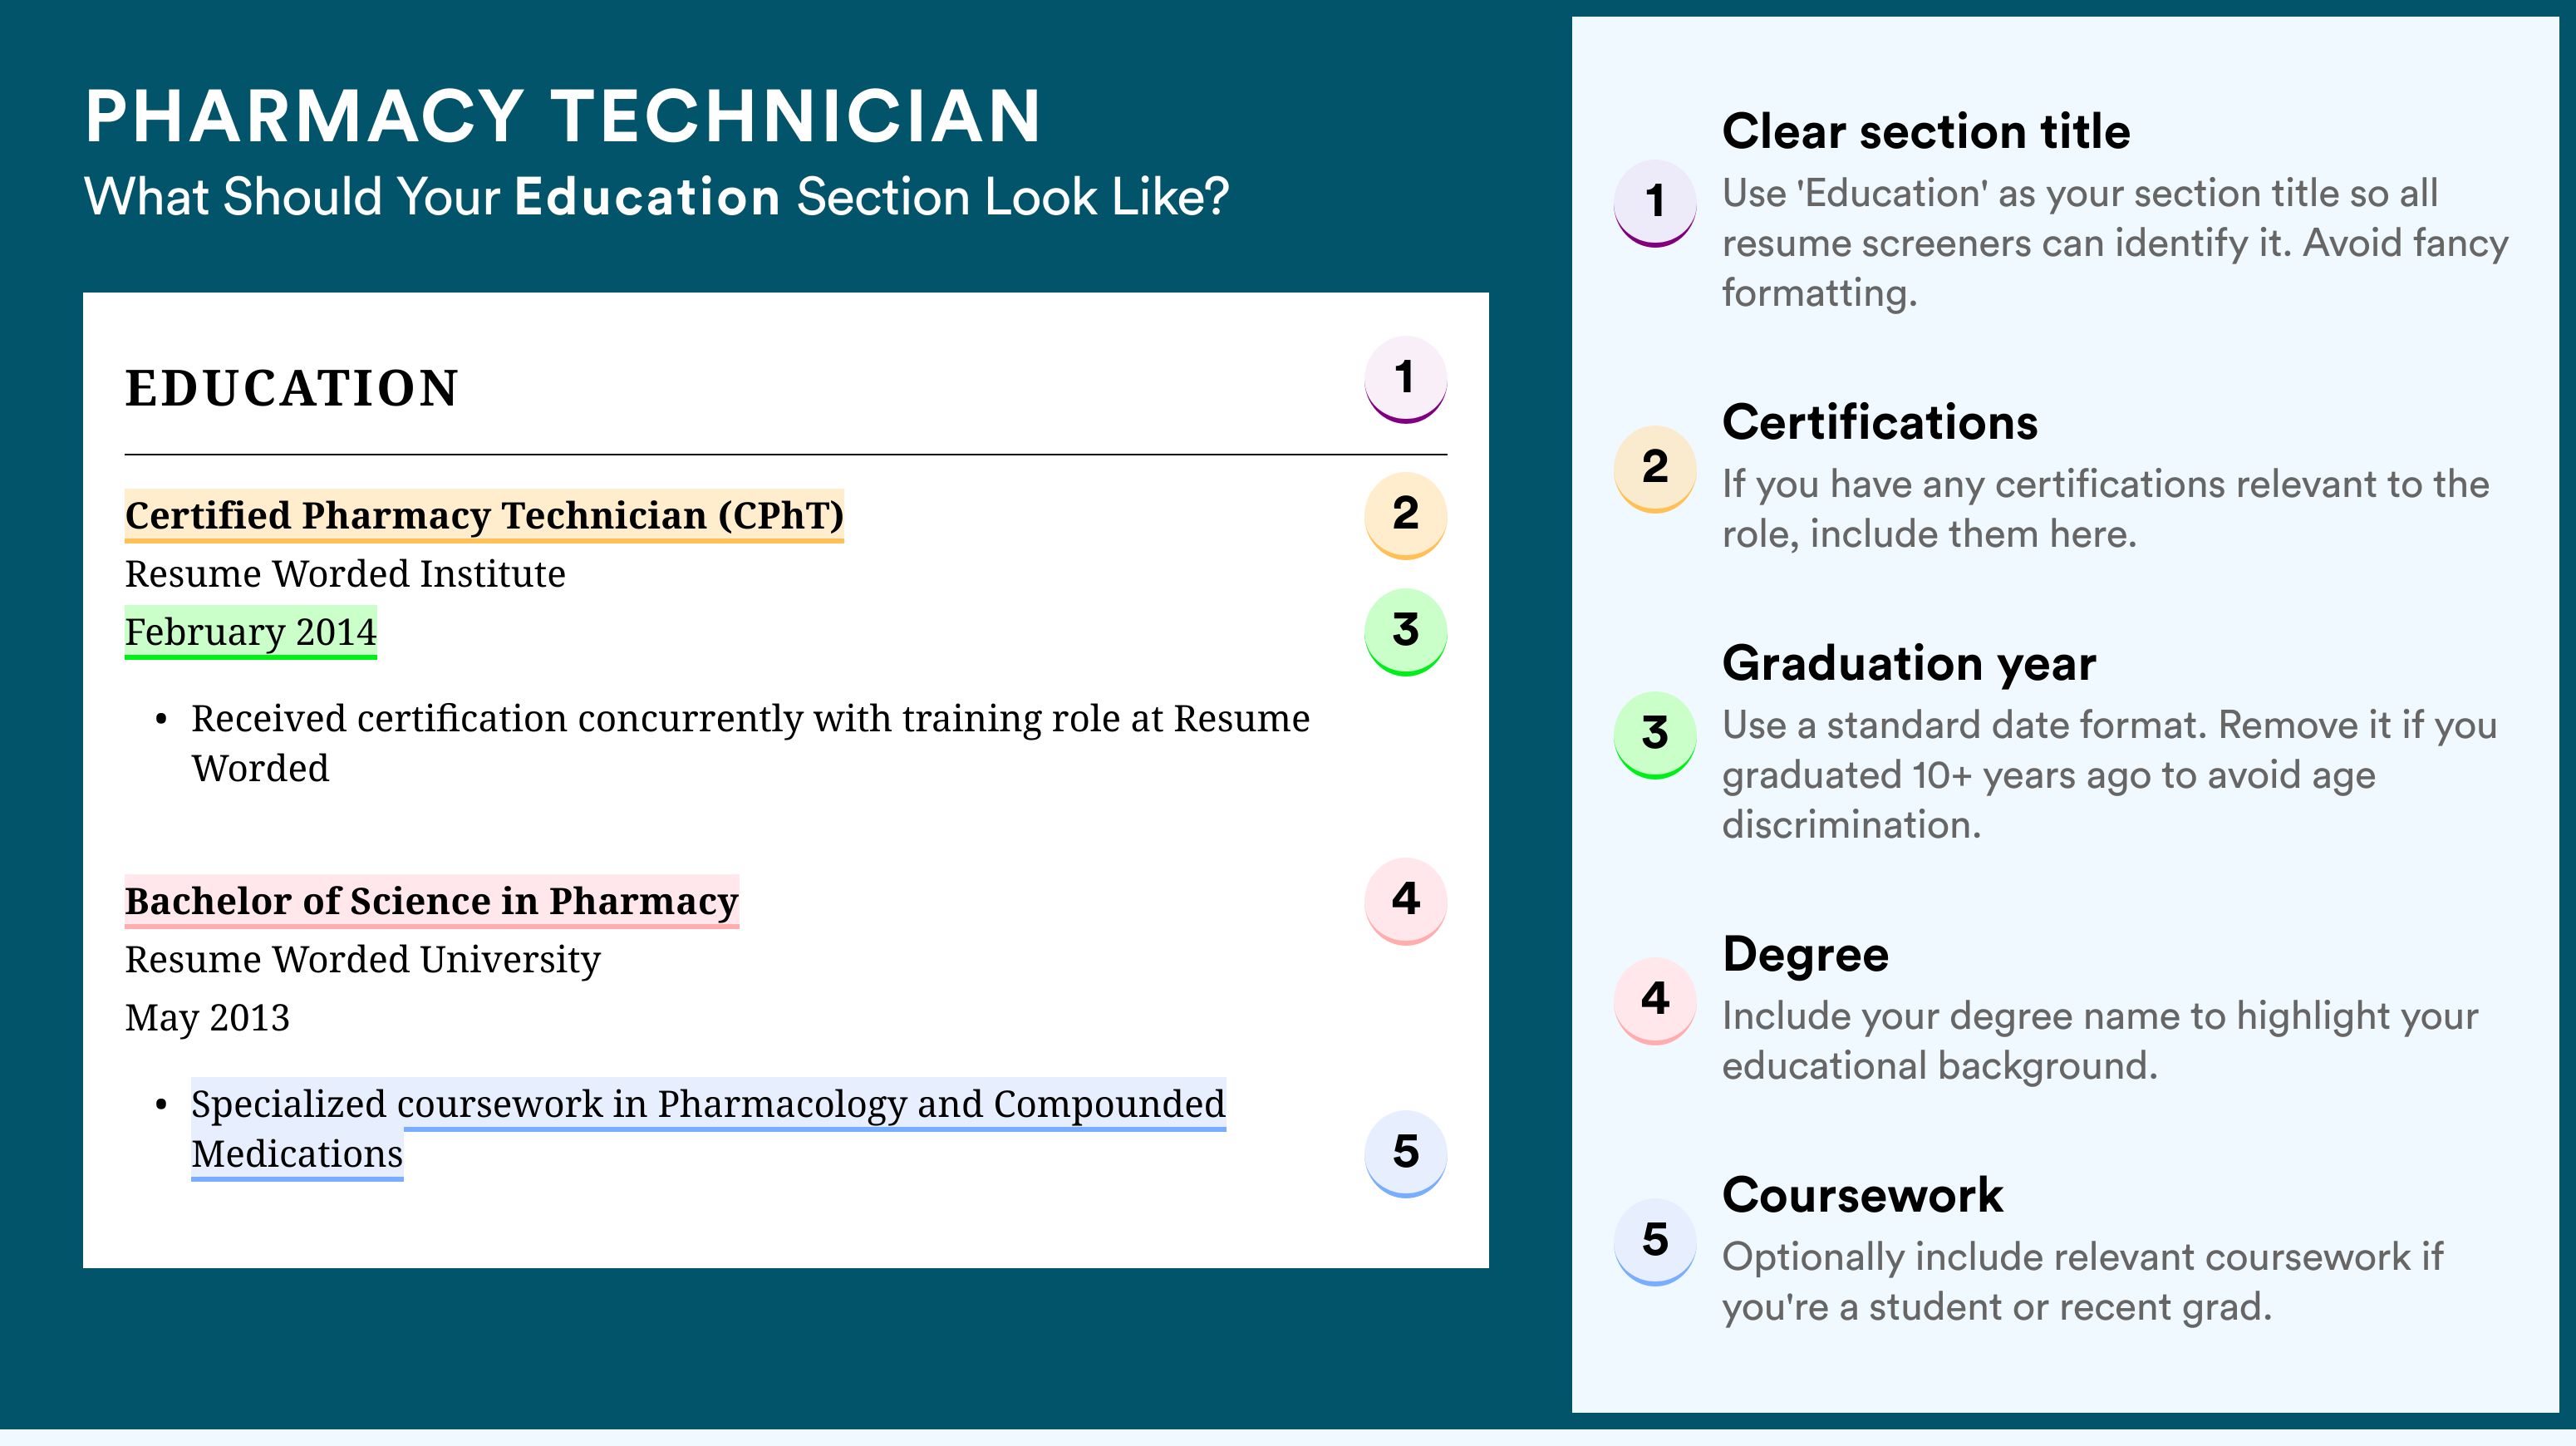 How To Write An Education Section - Pharmacy Technician Roles